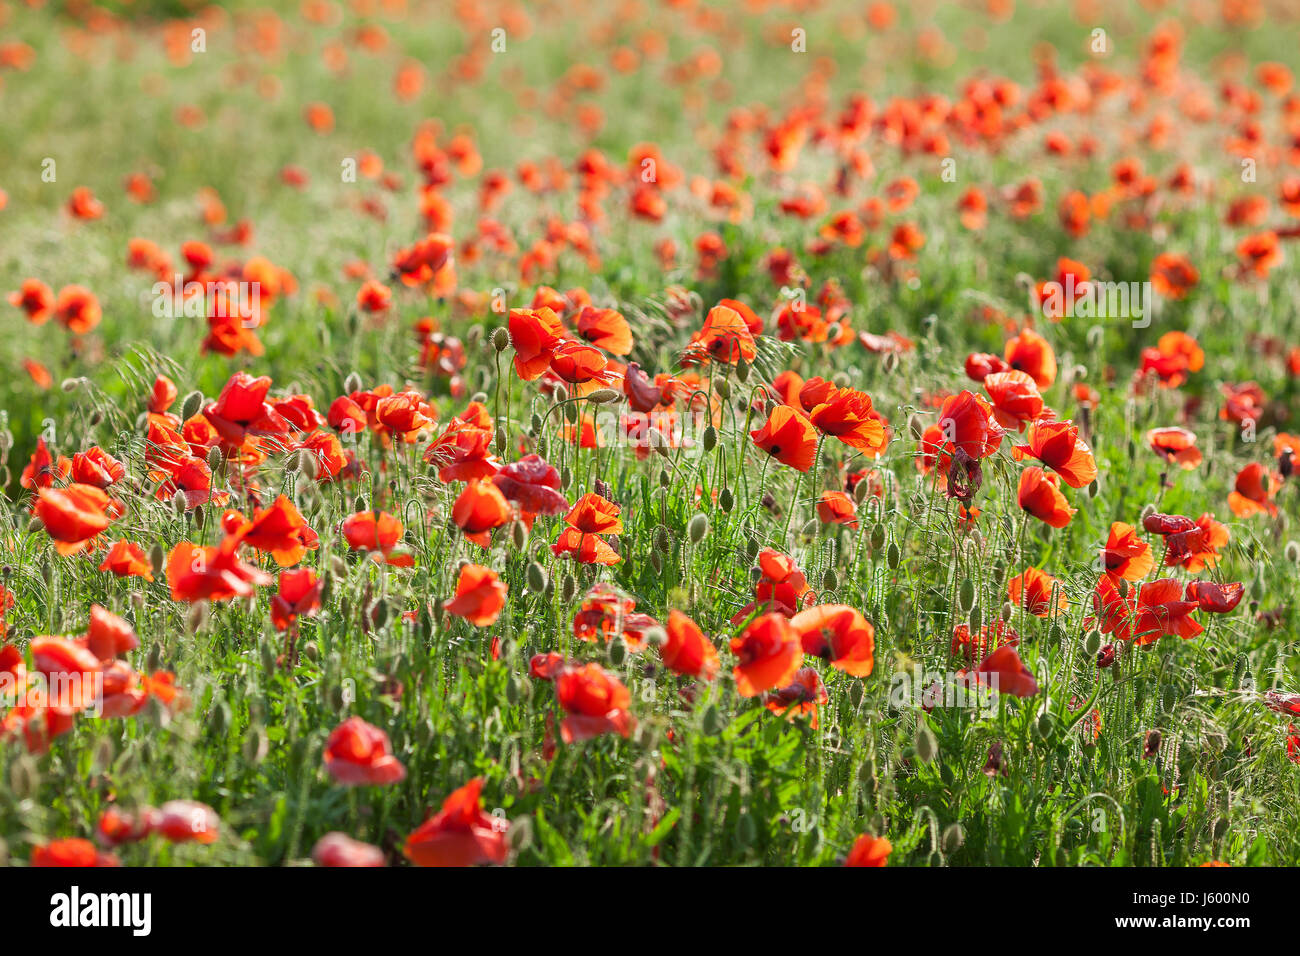 Poppy farming, nature, agriculture concept - industrial farming of poppy flowers - close-up on flowers and stems of the poppy field - empty space Stock Photo - Alamy